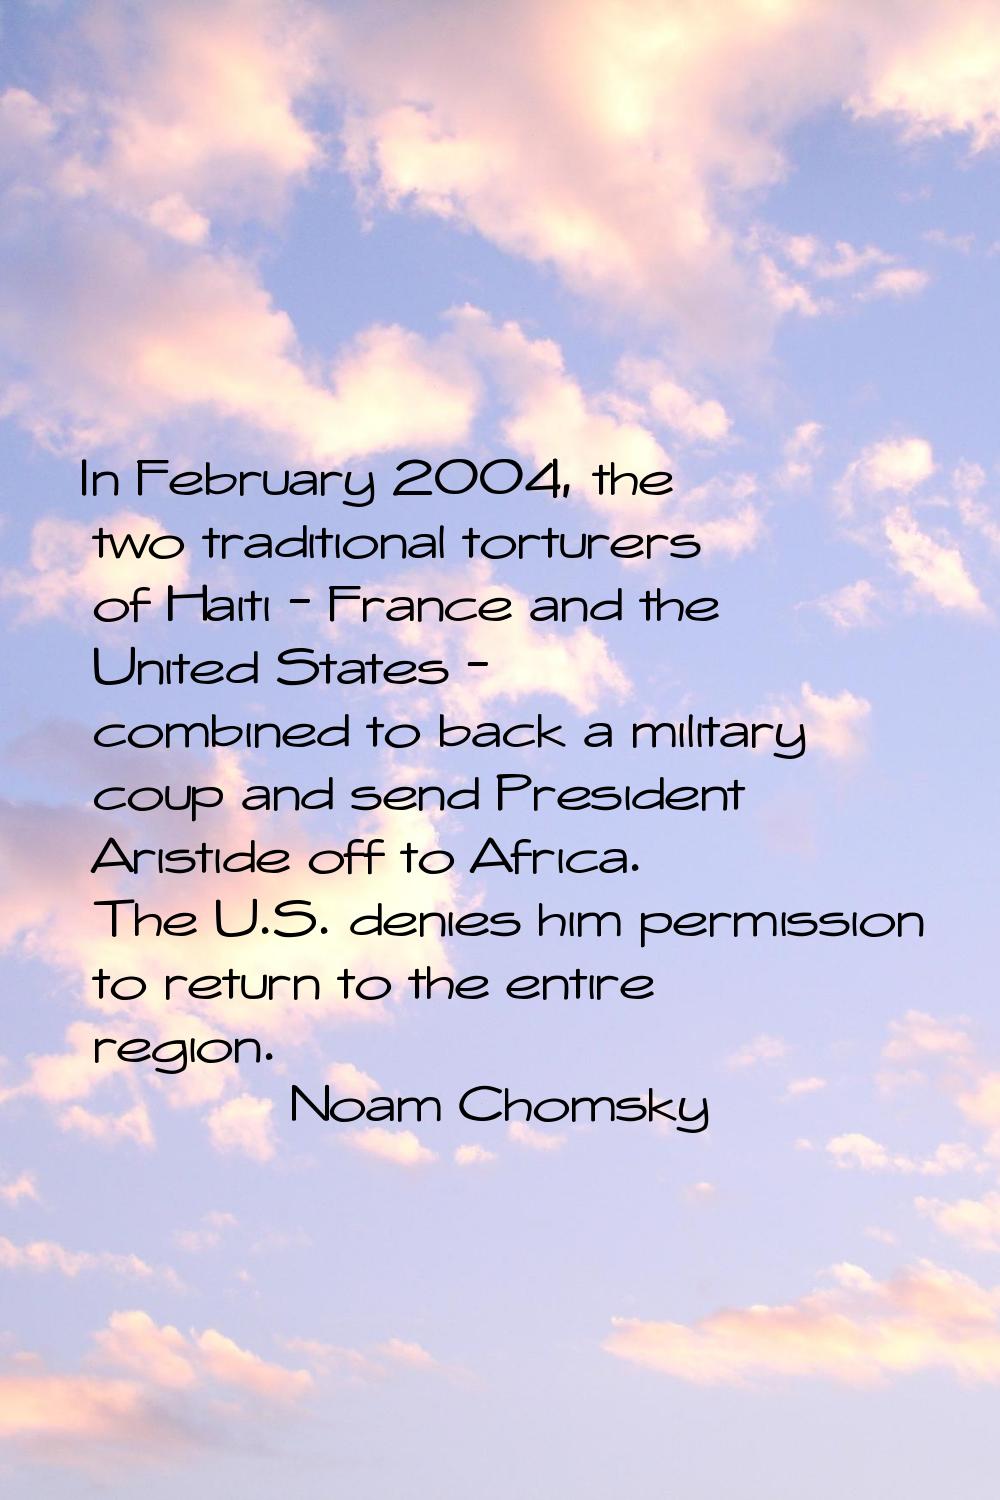 In February 2004, the two traditional torturers of Haiti - France and the United States - combined 